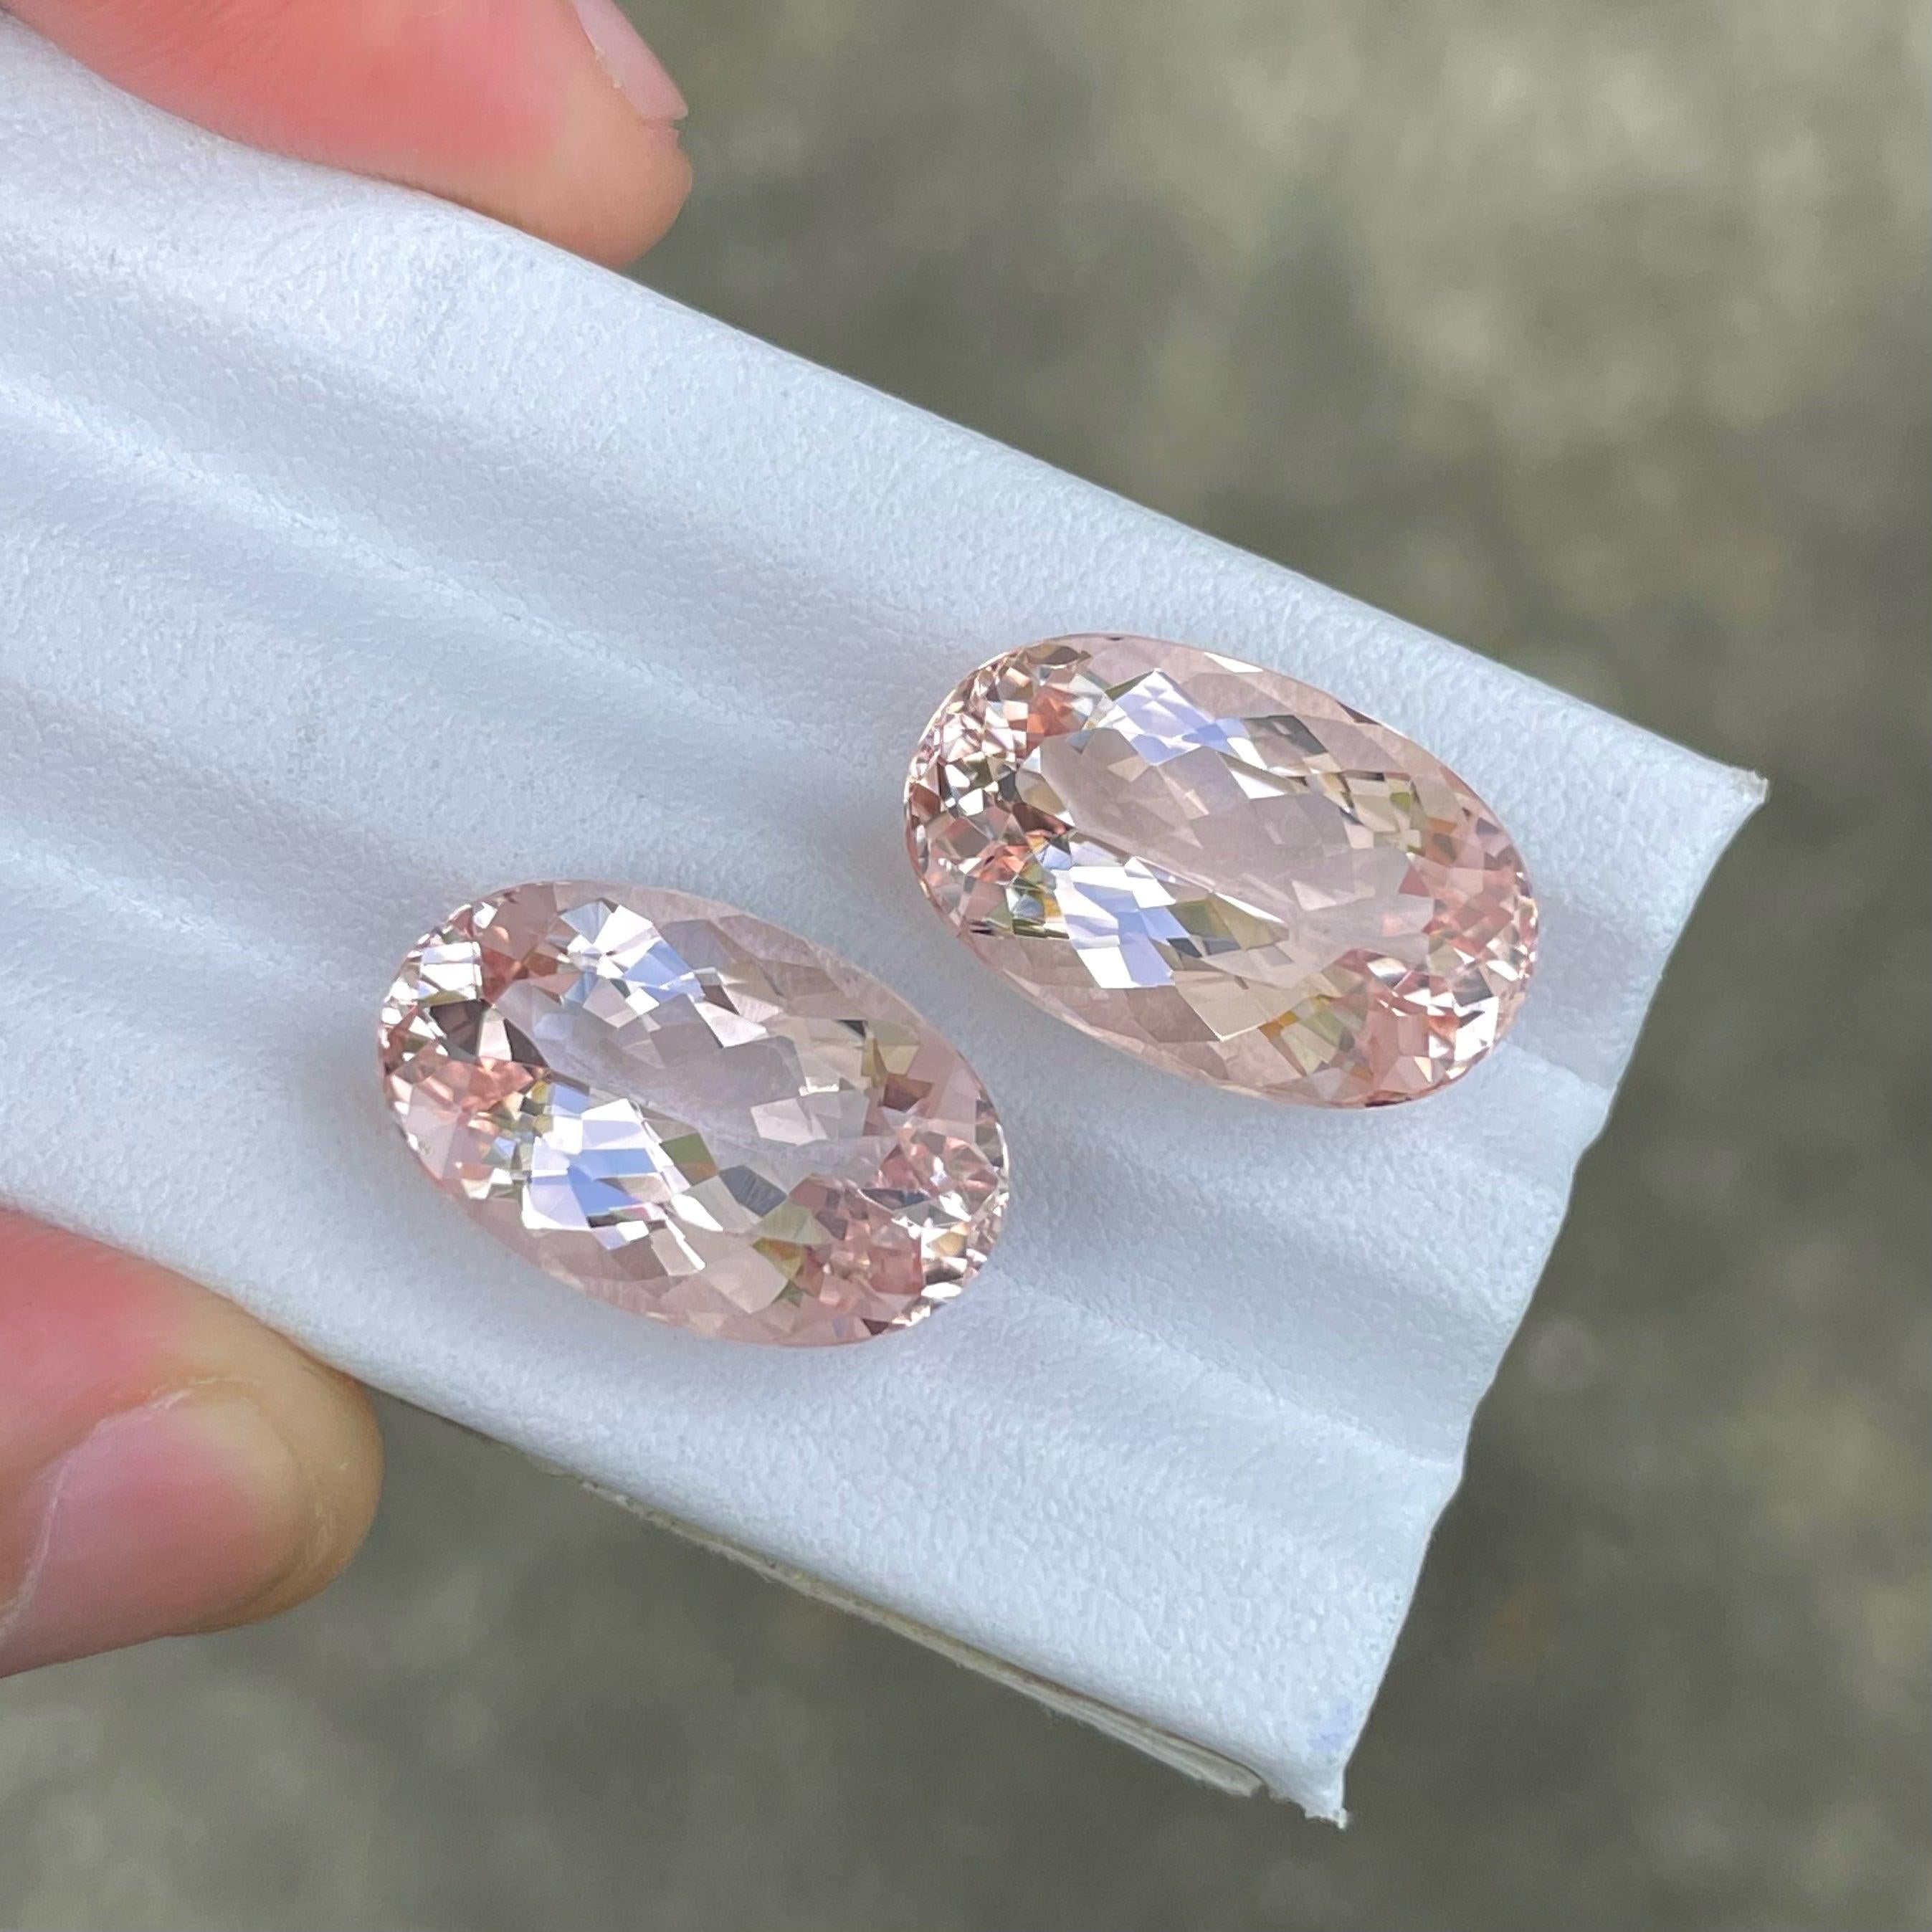 how to clean morganite stone